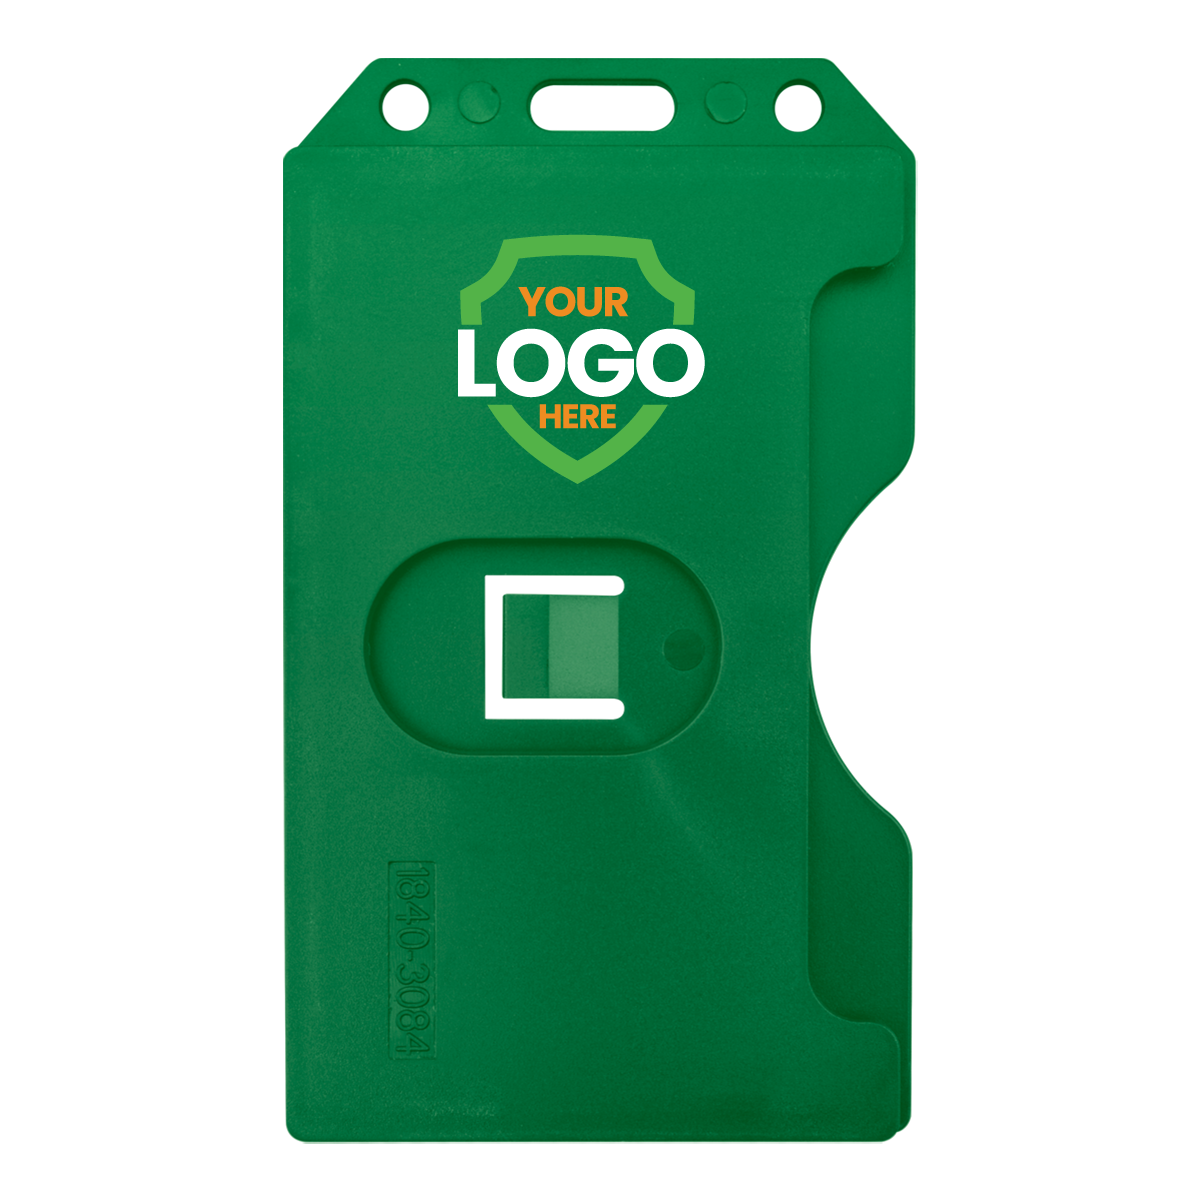 Vertical hard plastic green multi card badge holder with example logo showing customization option